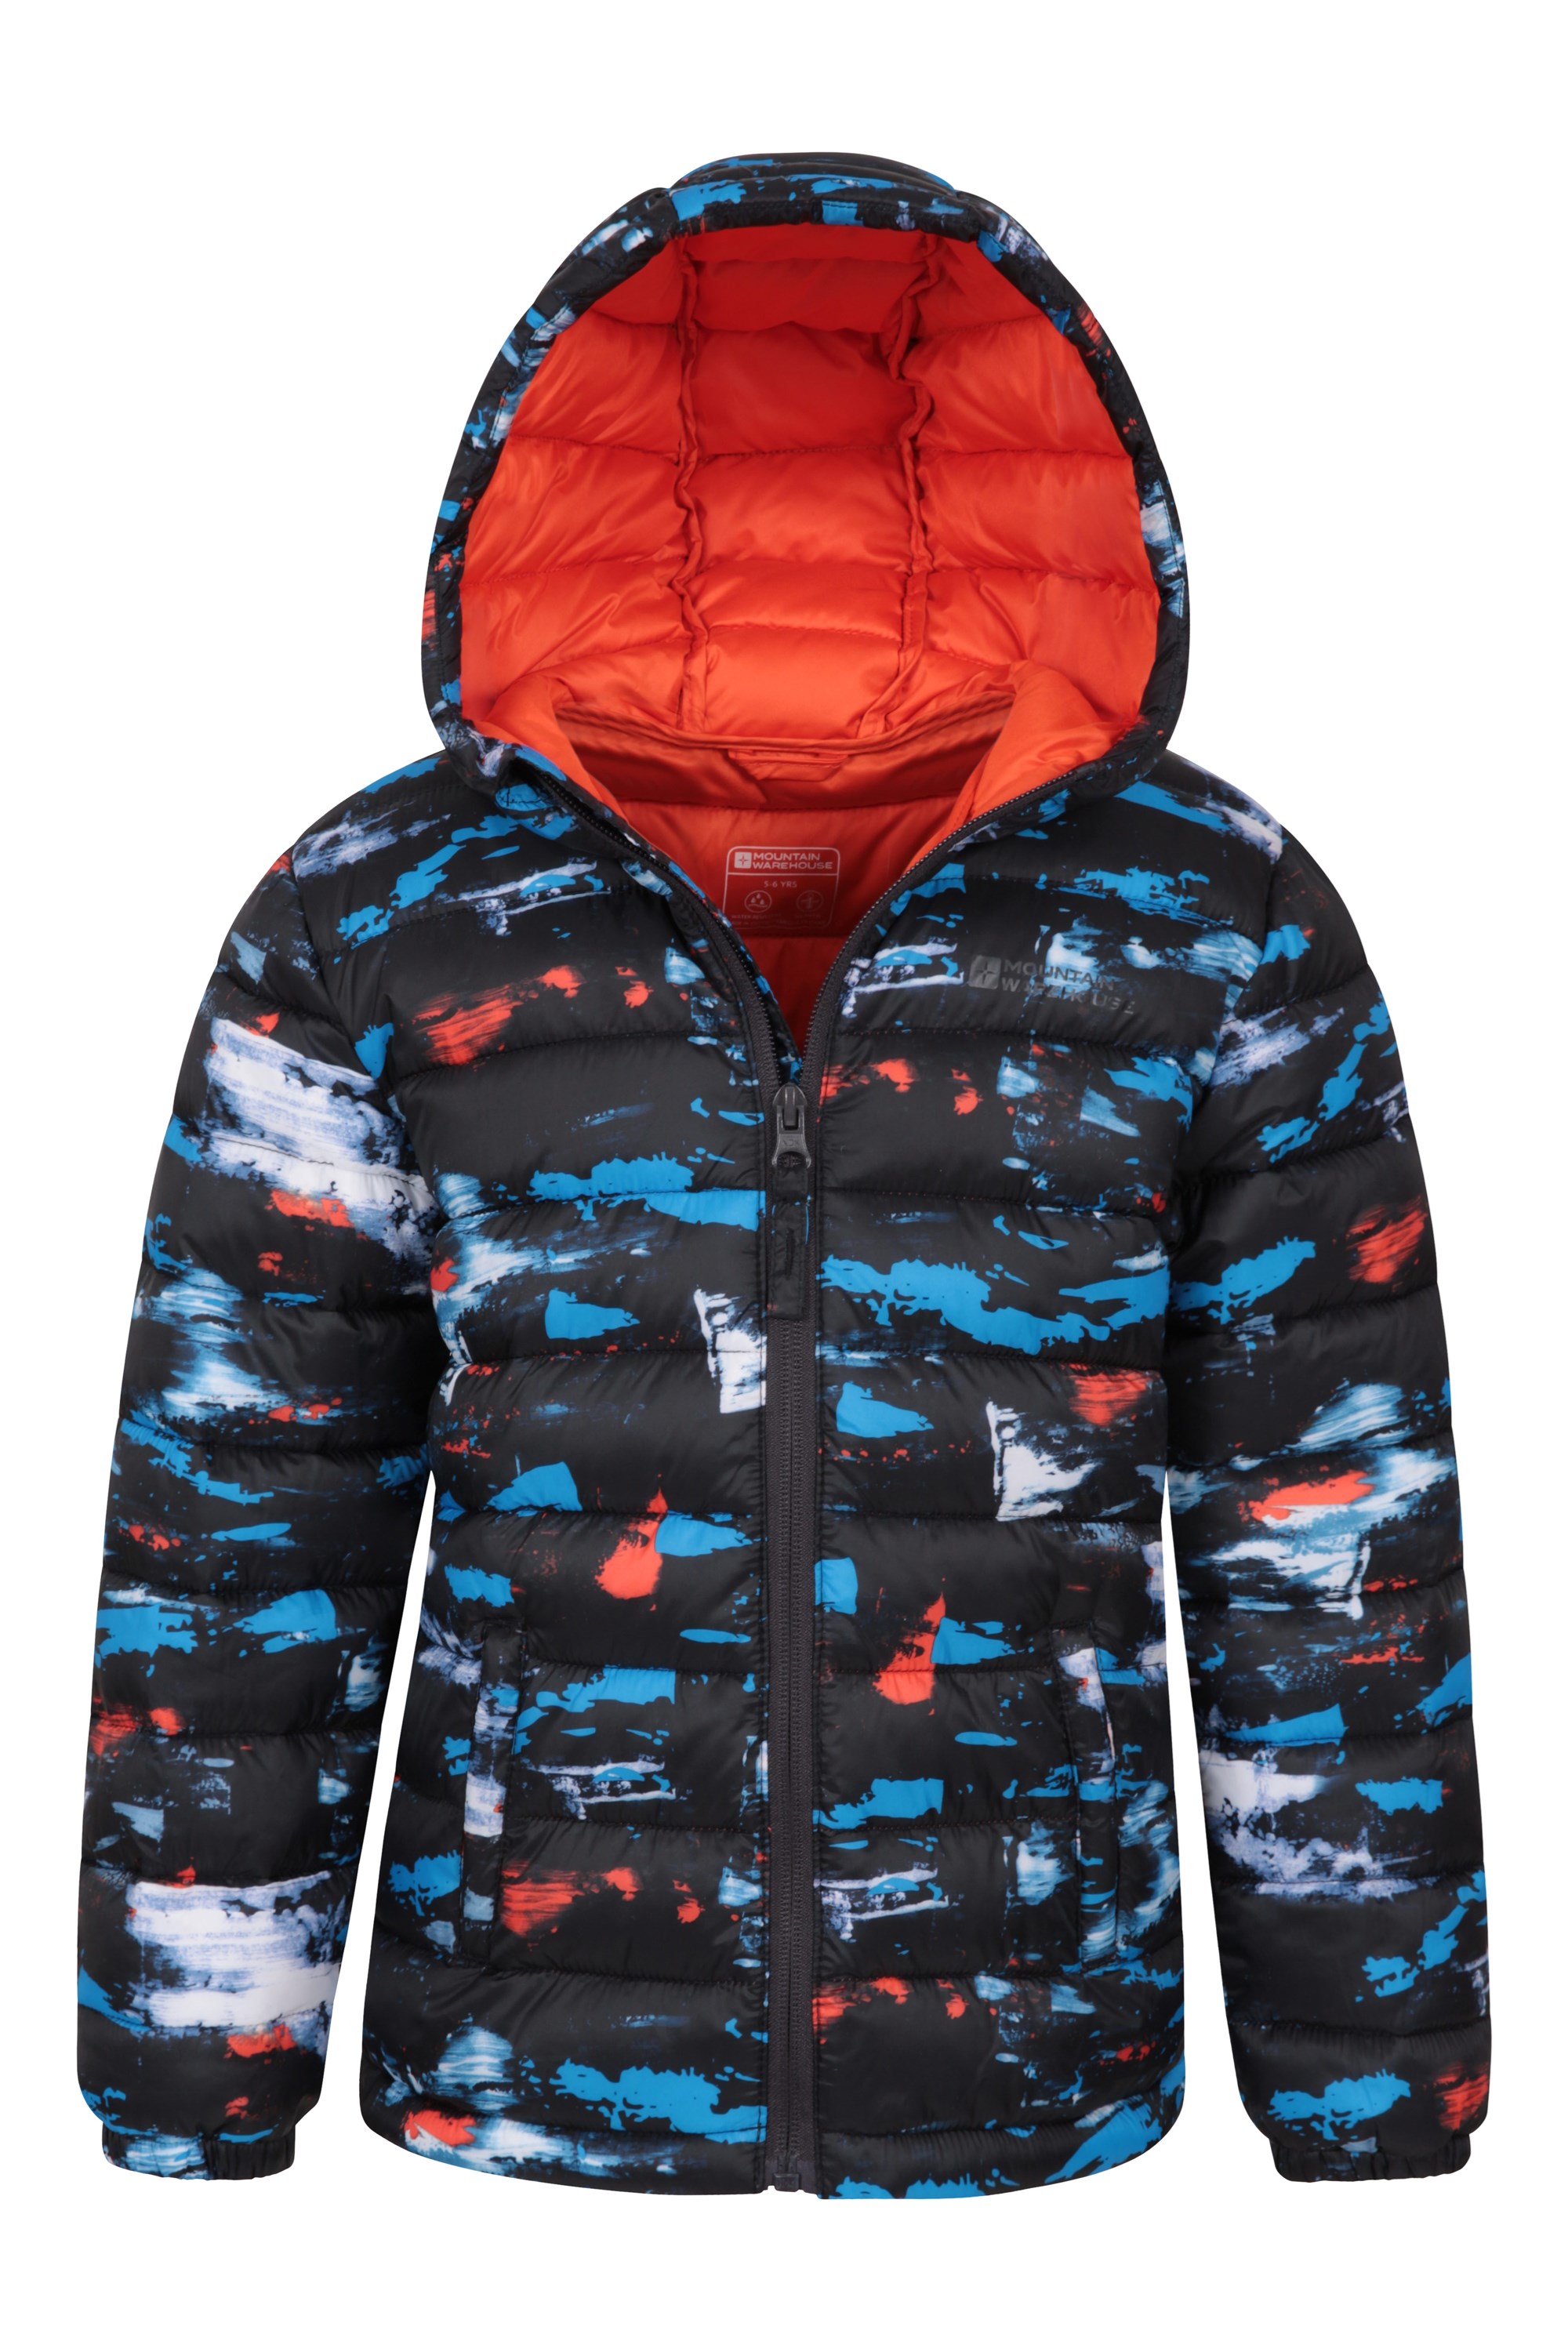 Water Resistant Rain Coat Elastic Cuffs & 2 Front Pockets Casual Jacket for Travelling Mountain Warehouse Seasons Boys Padded Jacket Lightweight Kids Winter Jacket 